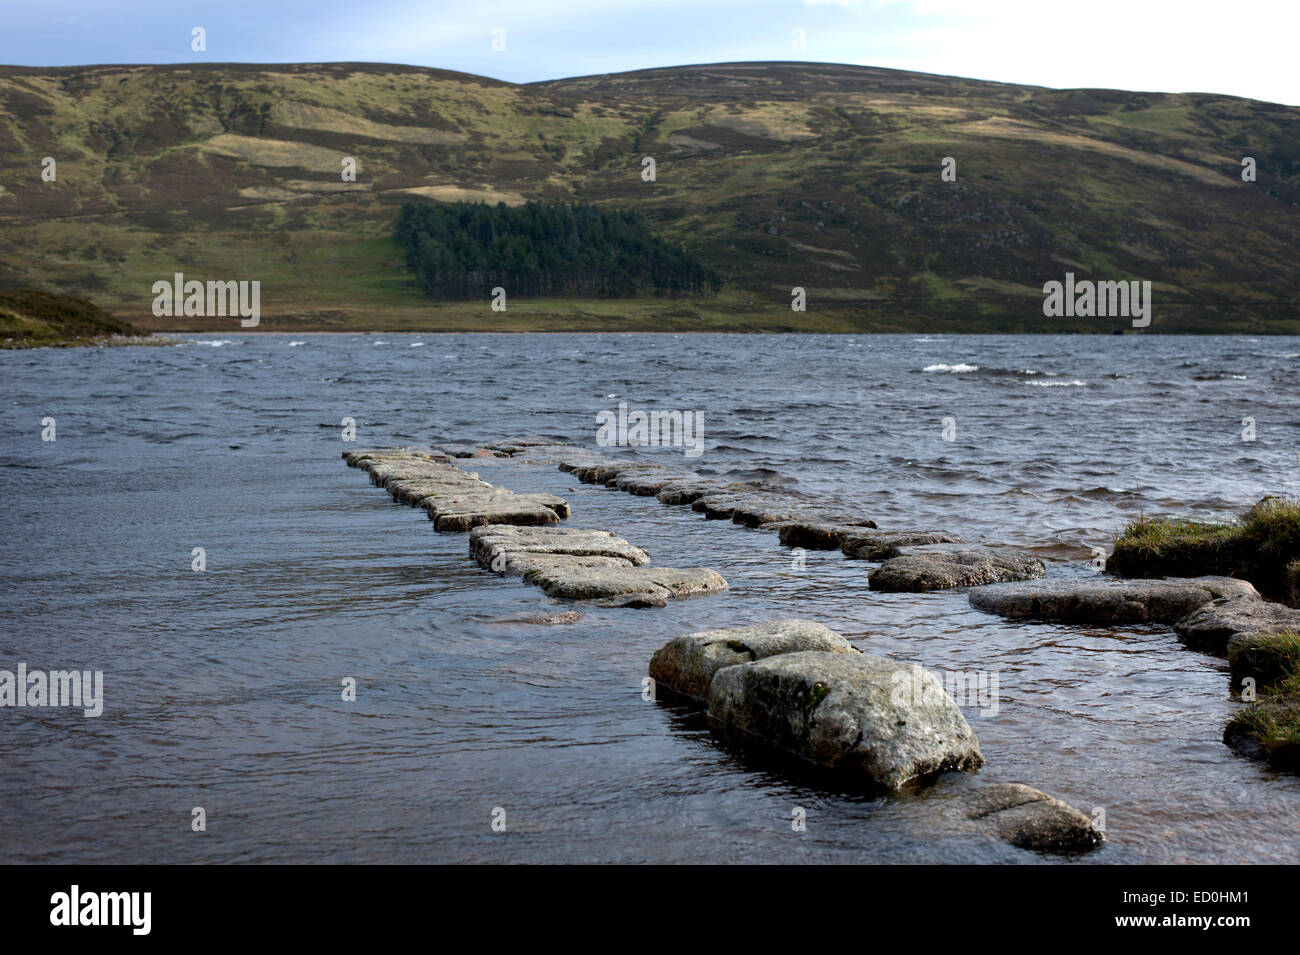 Looking along rubble jetties of the boat slip at the upper end of Loch Muick in the Cairngorms National Park Stock Photo